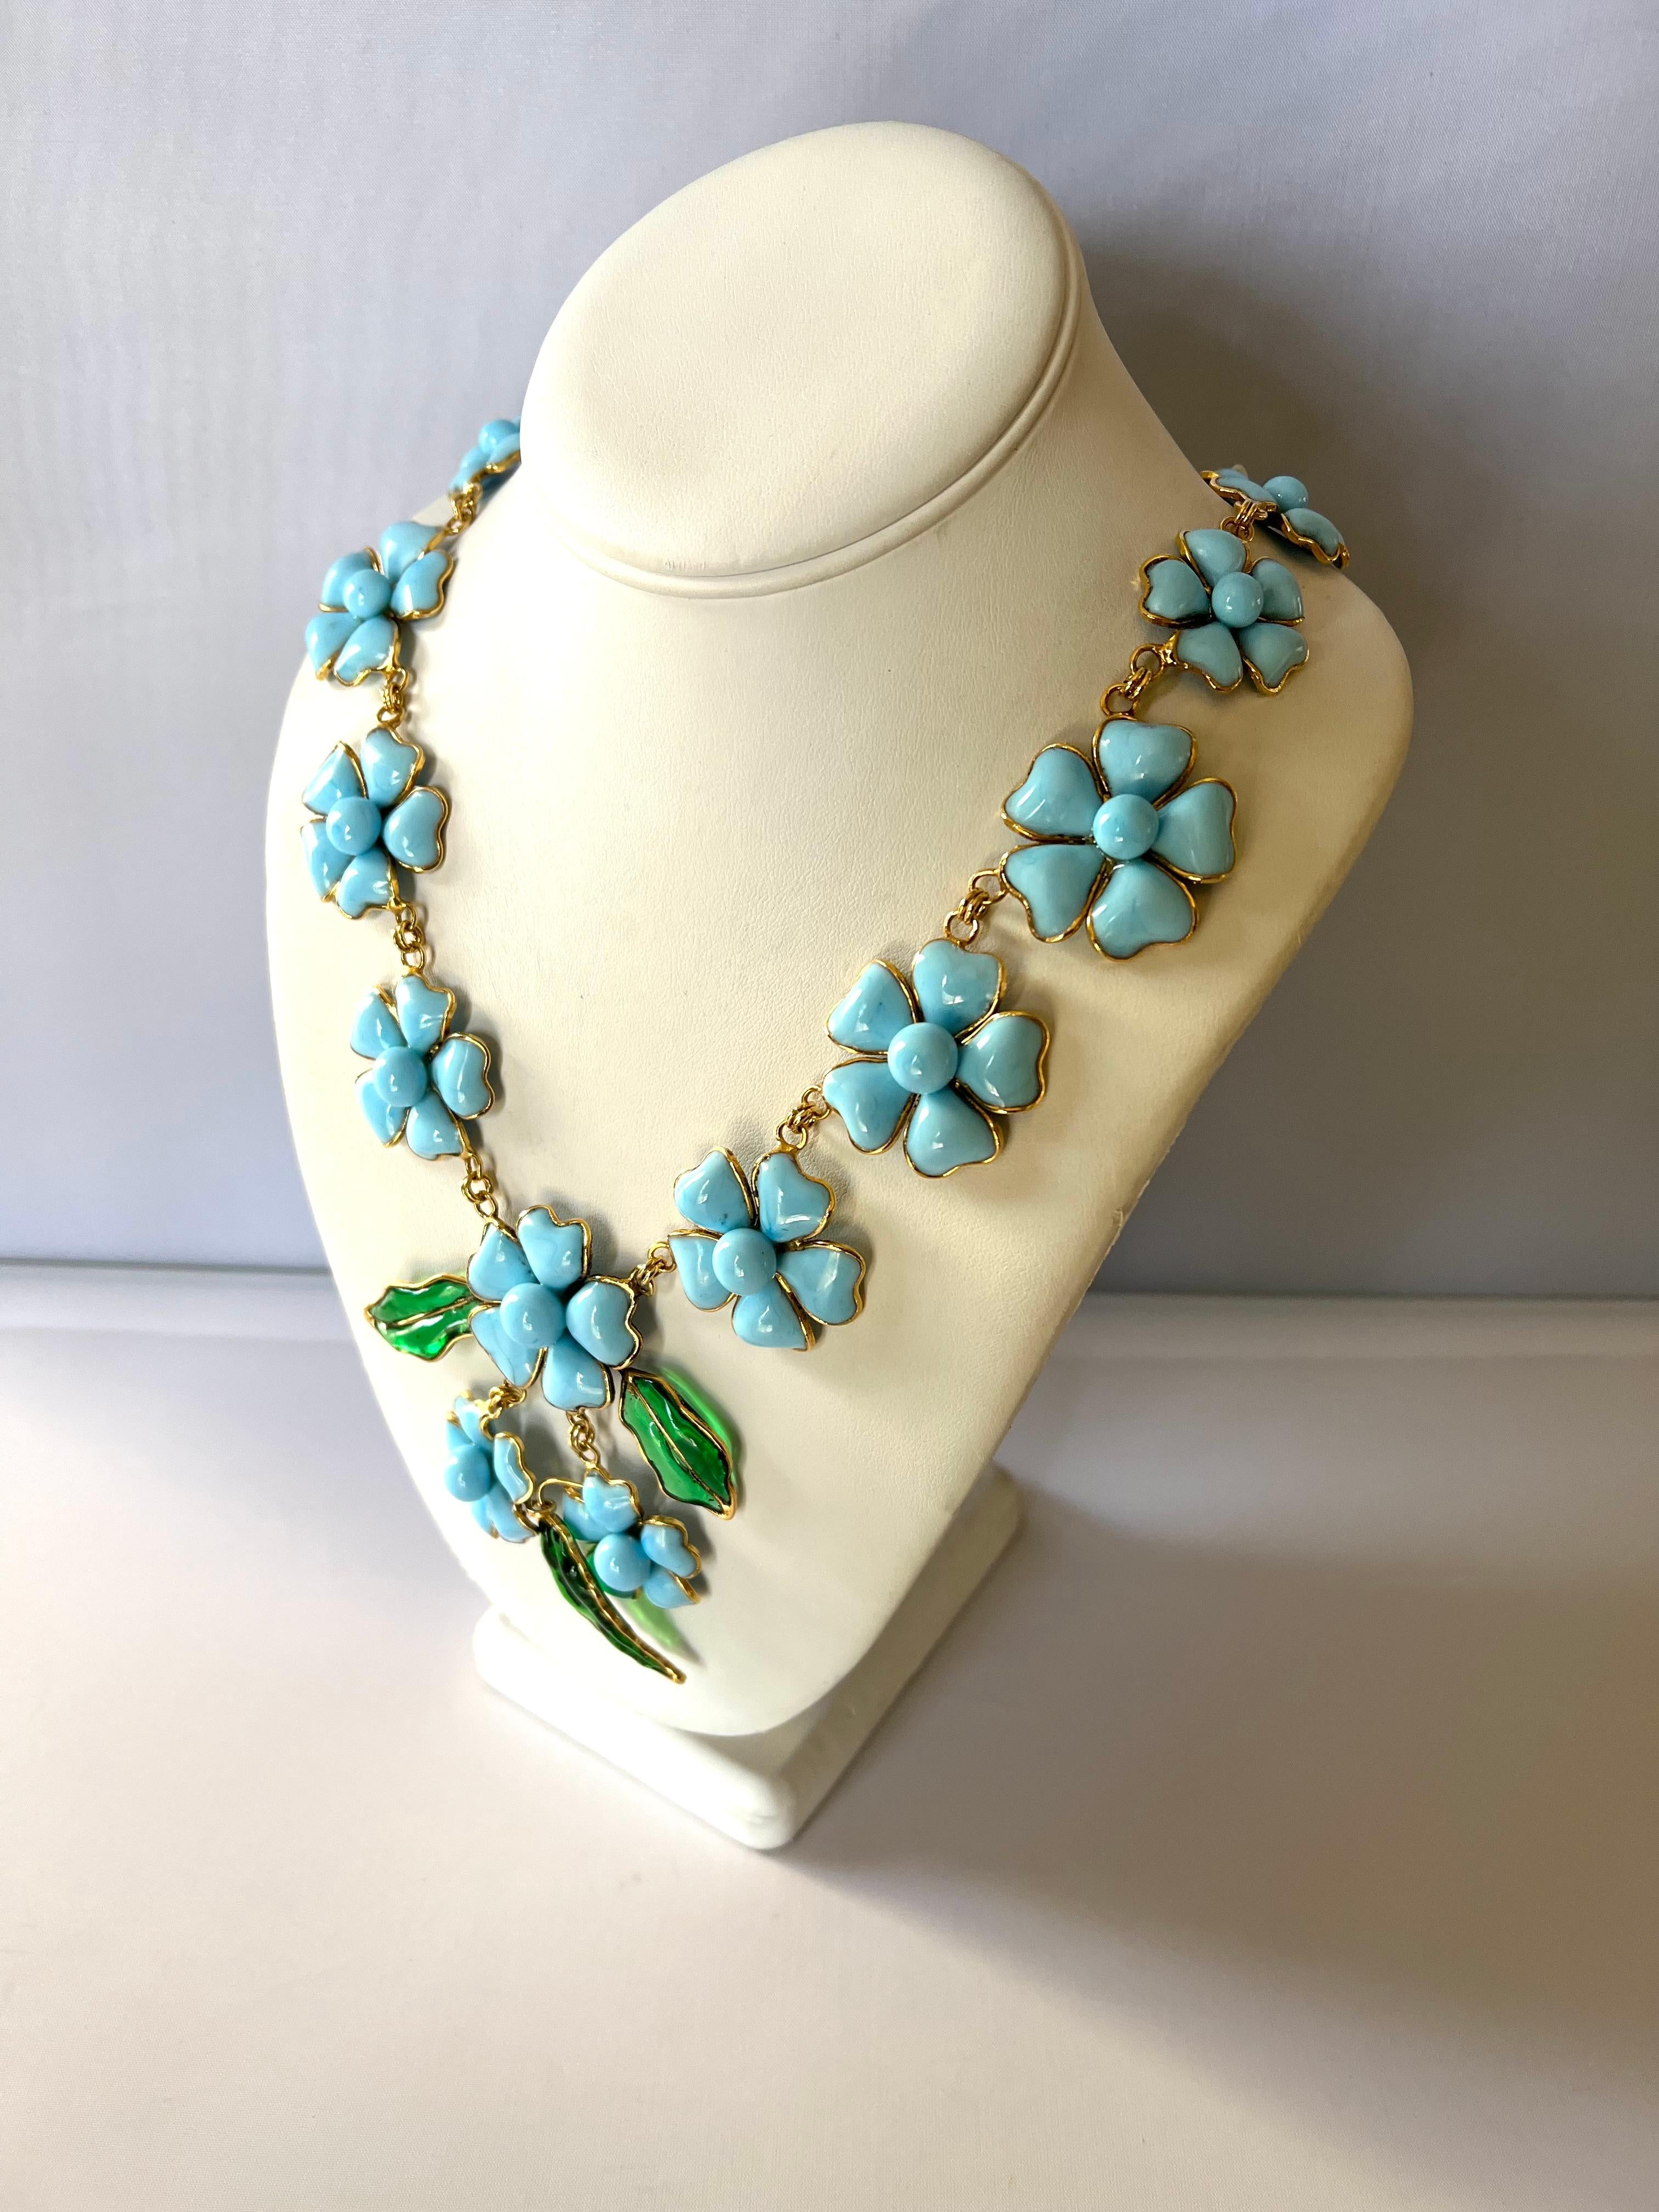 Vintage Chanel Camellia Turquoise Necklace  In Excellent Condition For Sale In Palm Springs, CA